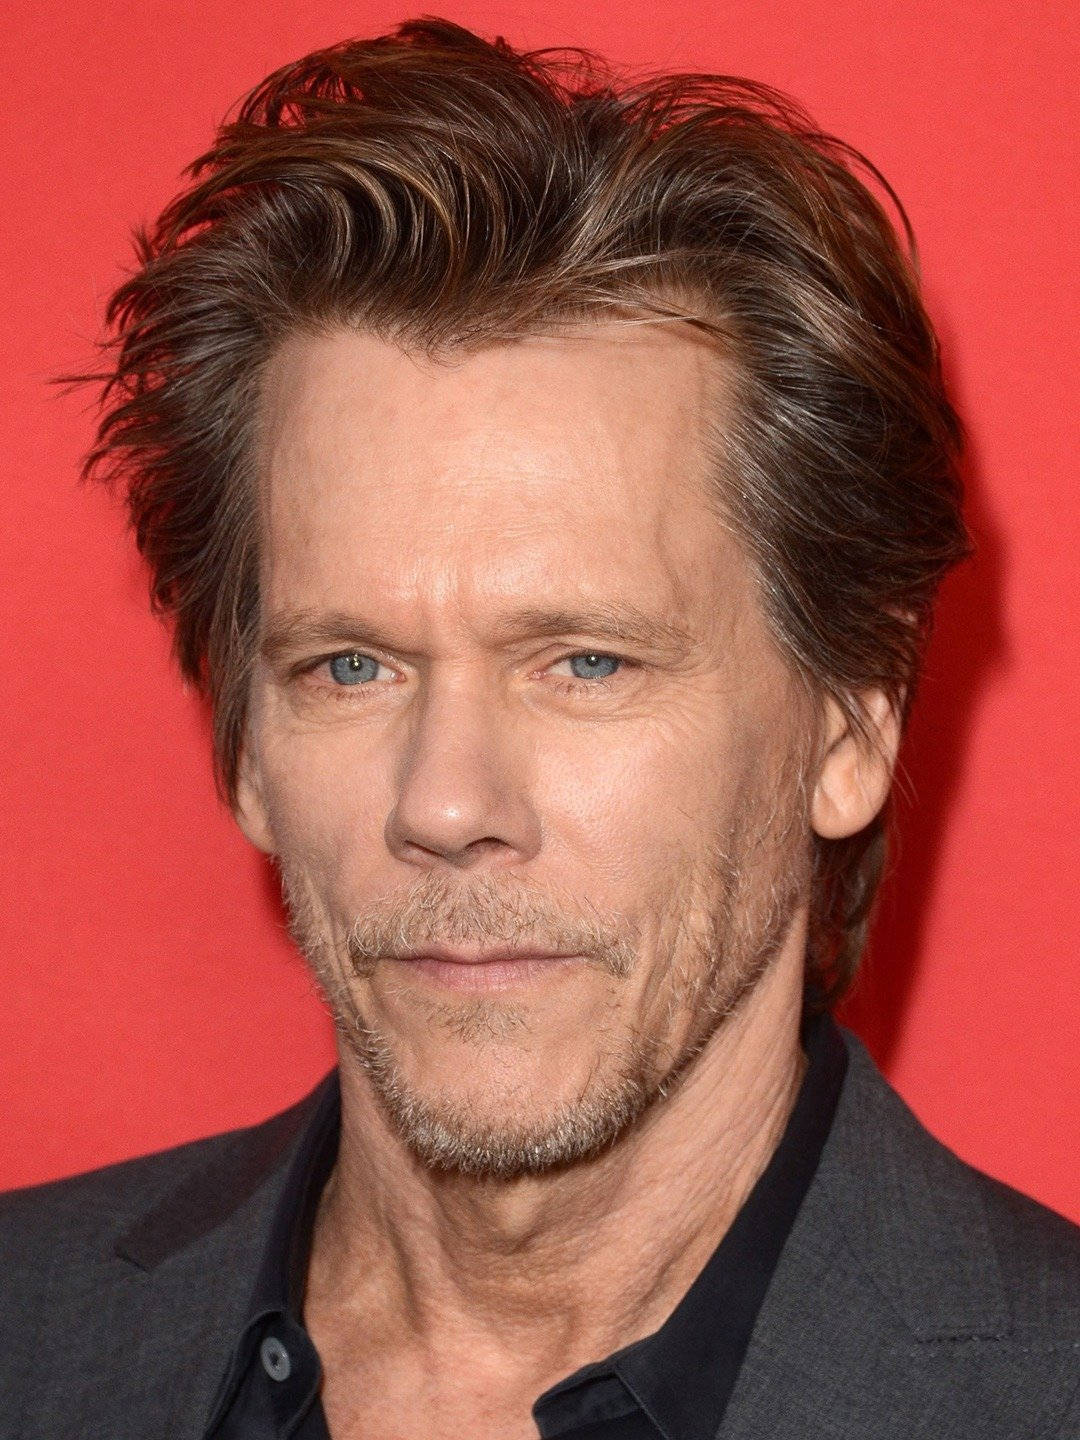 Kevinbacon In Red Translates To 